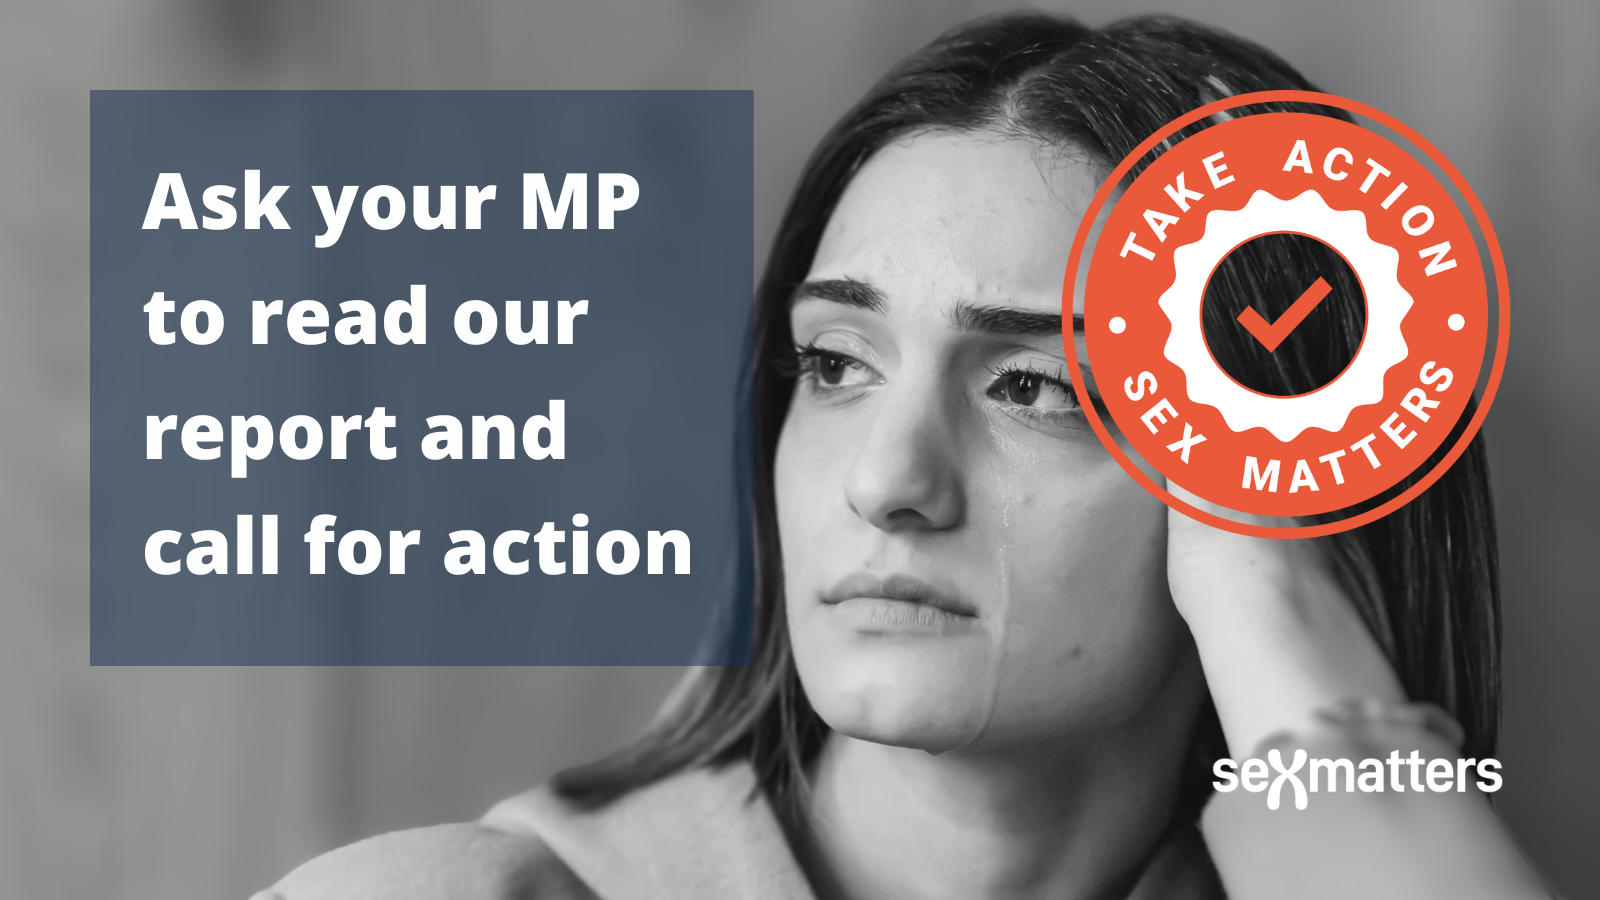 Ask your MP to read our report and call for action